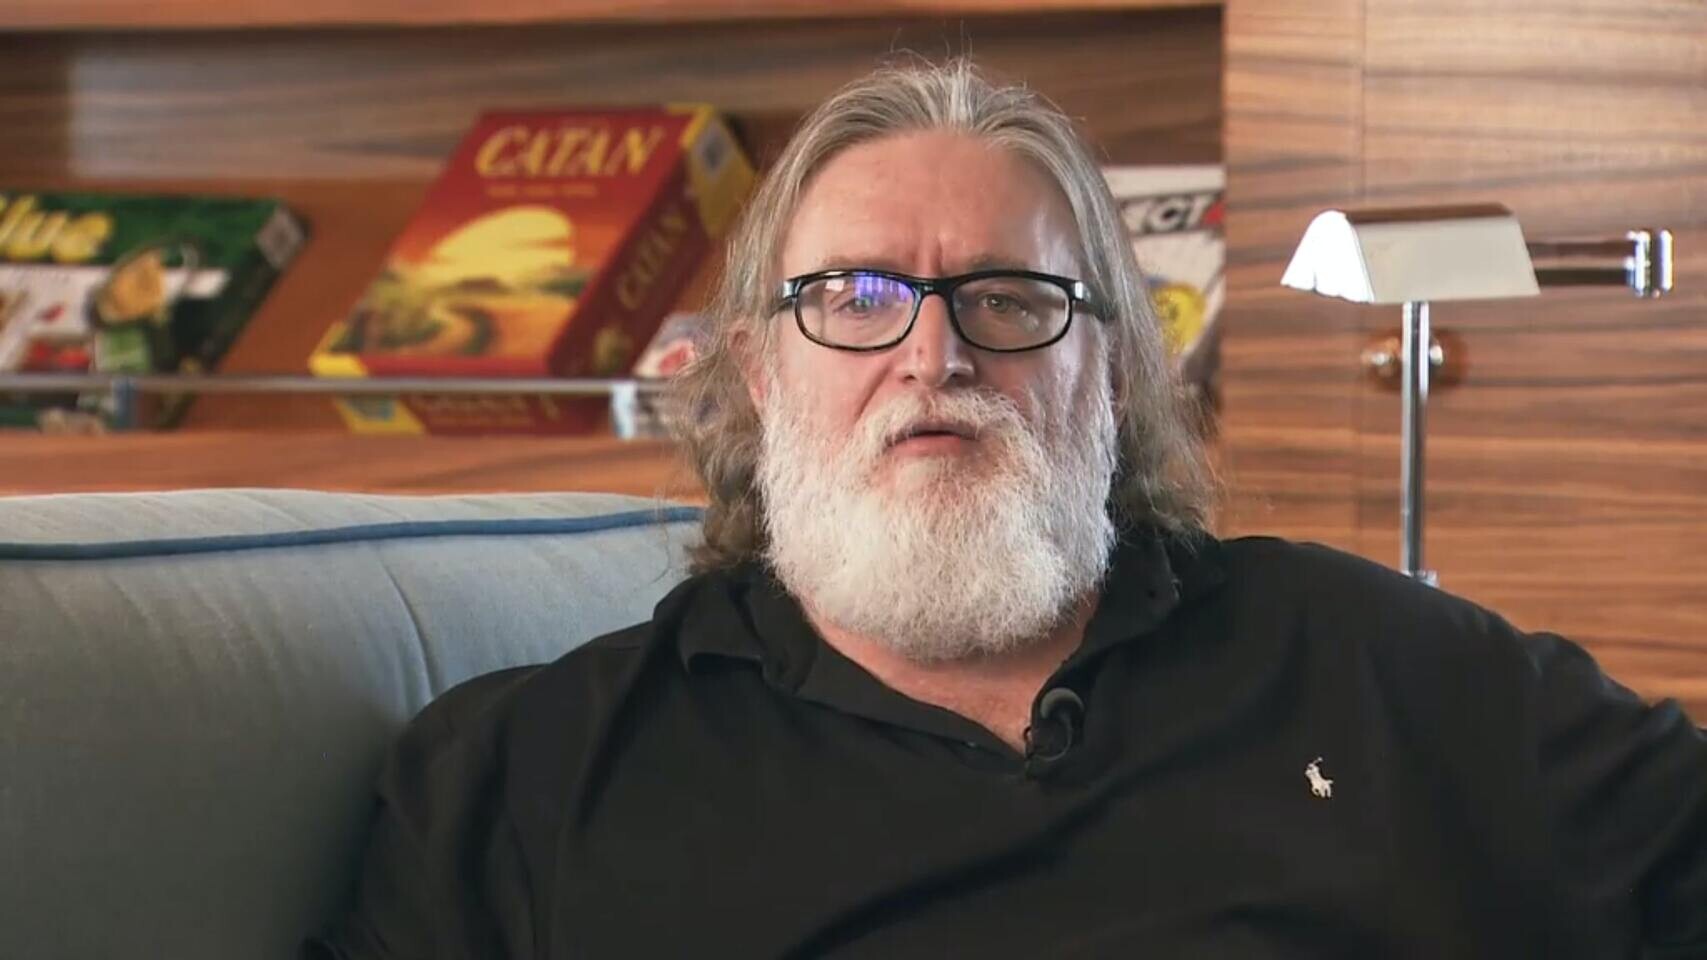 Gabe Newell's $5.5 billion net worth makes him one of the 100 richest  people in the US